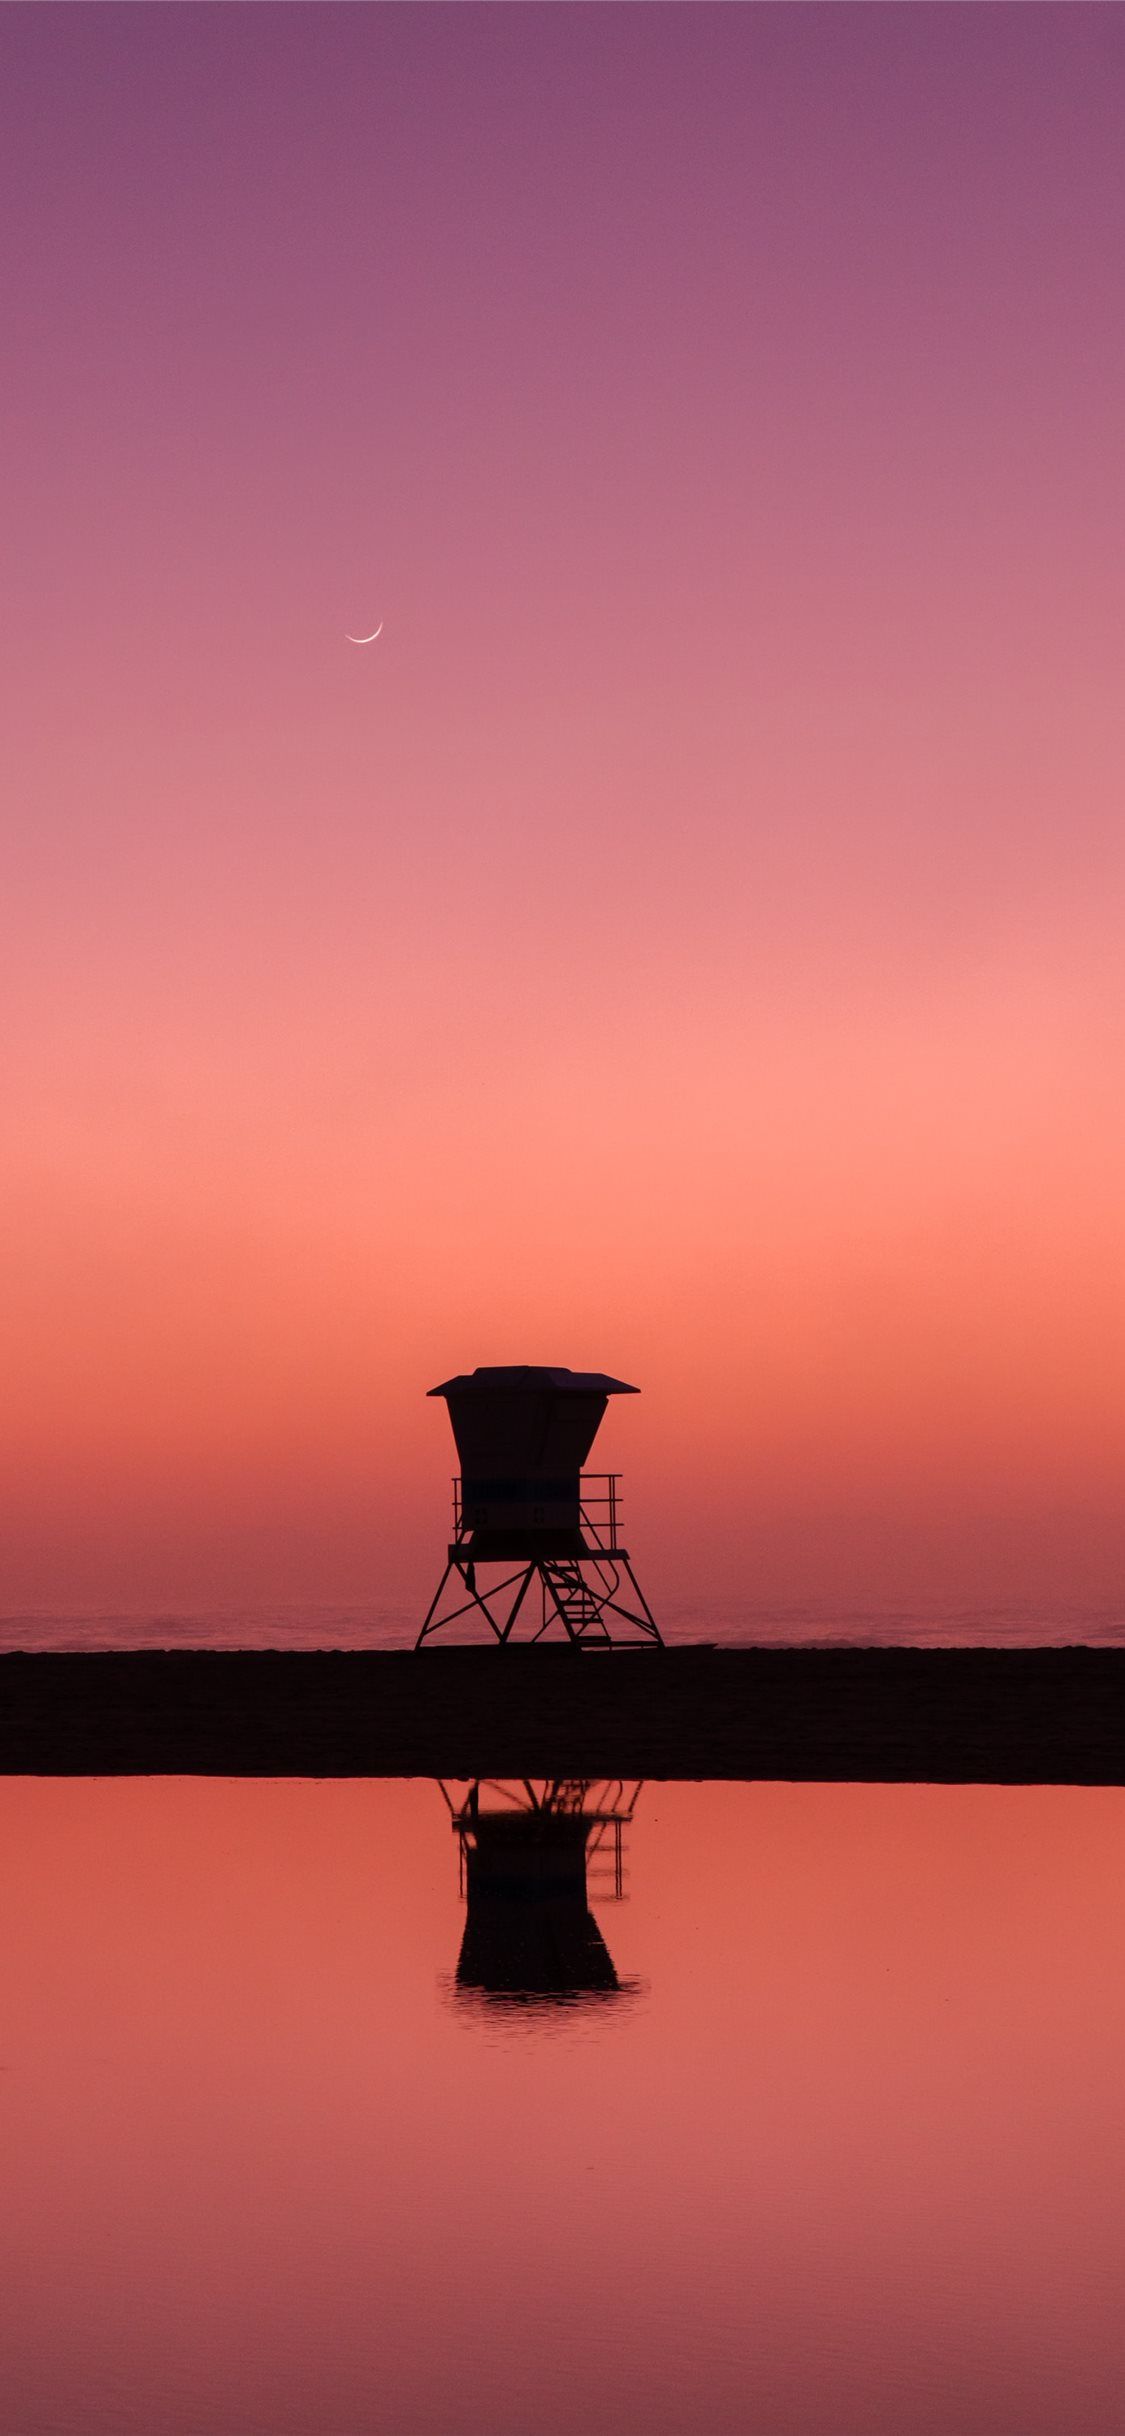 silhouette photo of lifeguard house iPhone X Wallpaper Free Download